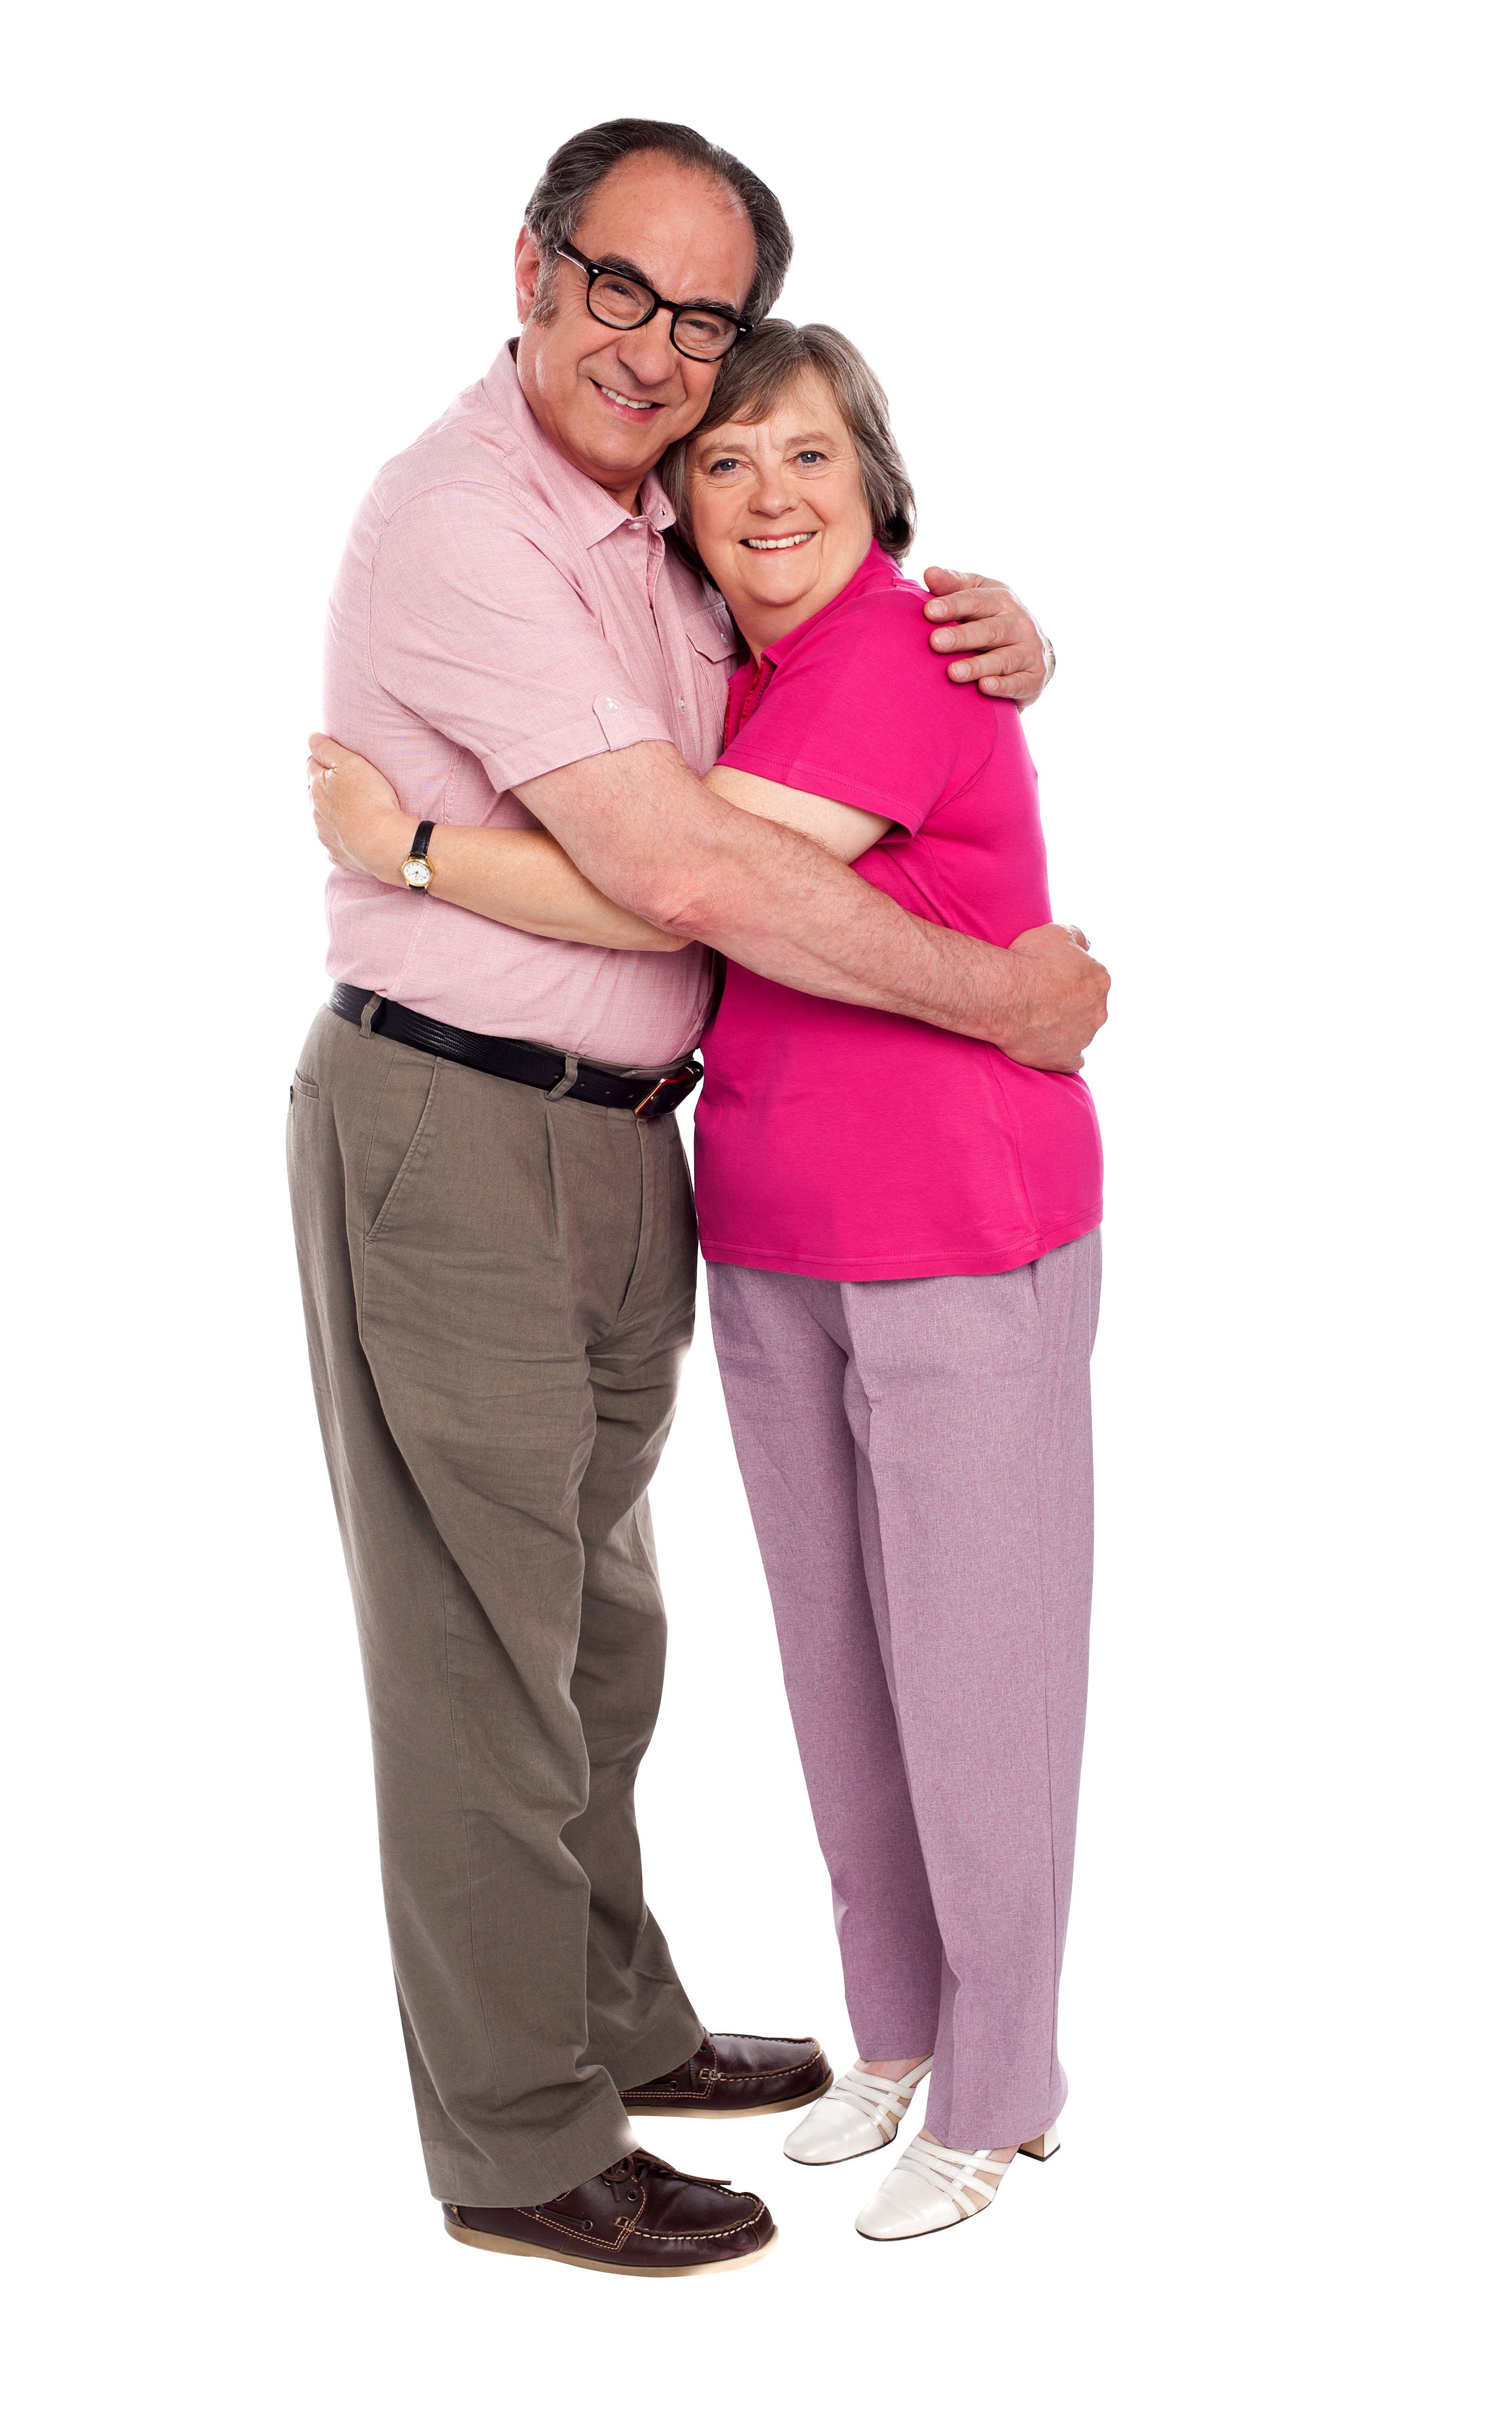 Old Couple PNG Image